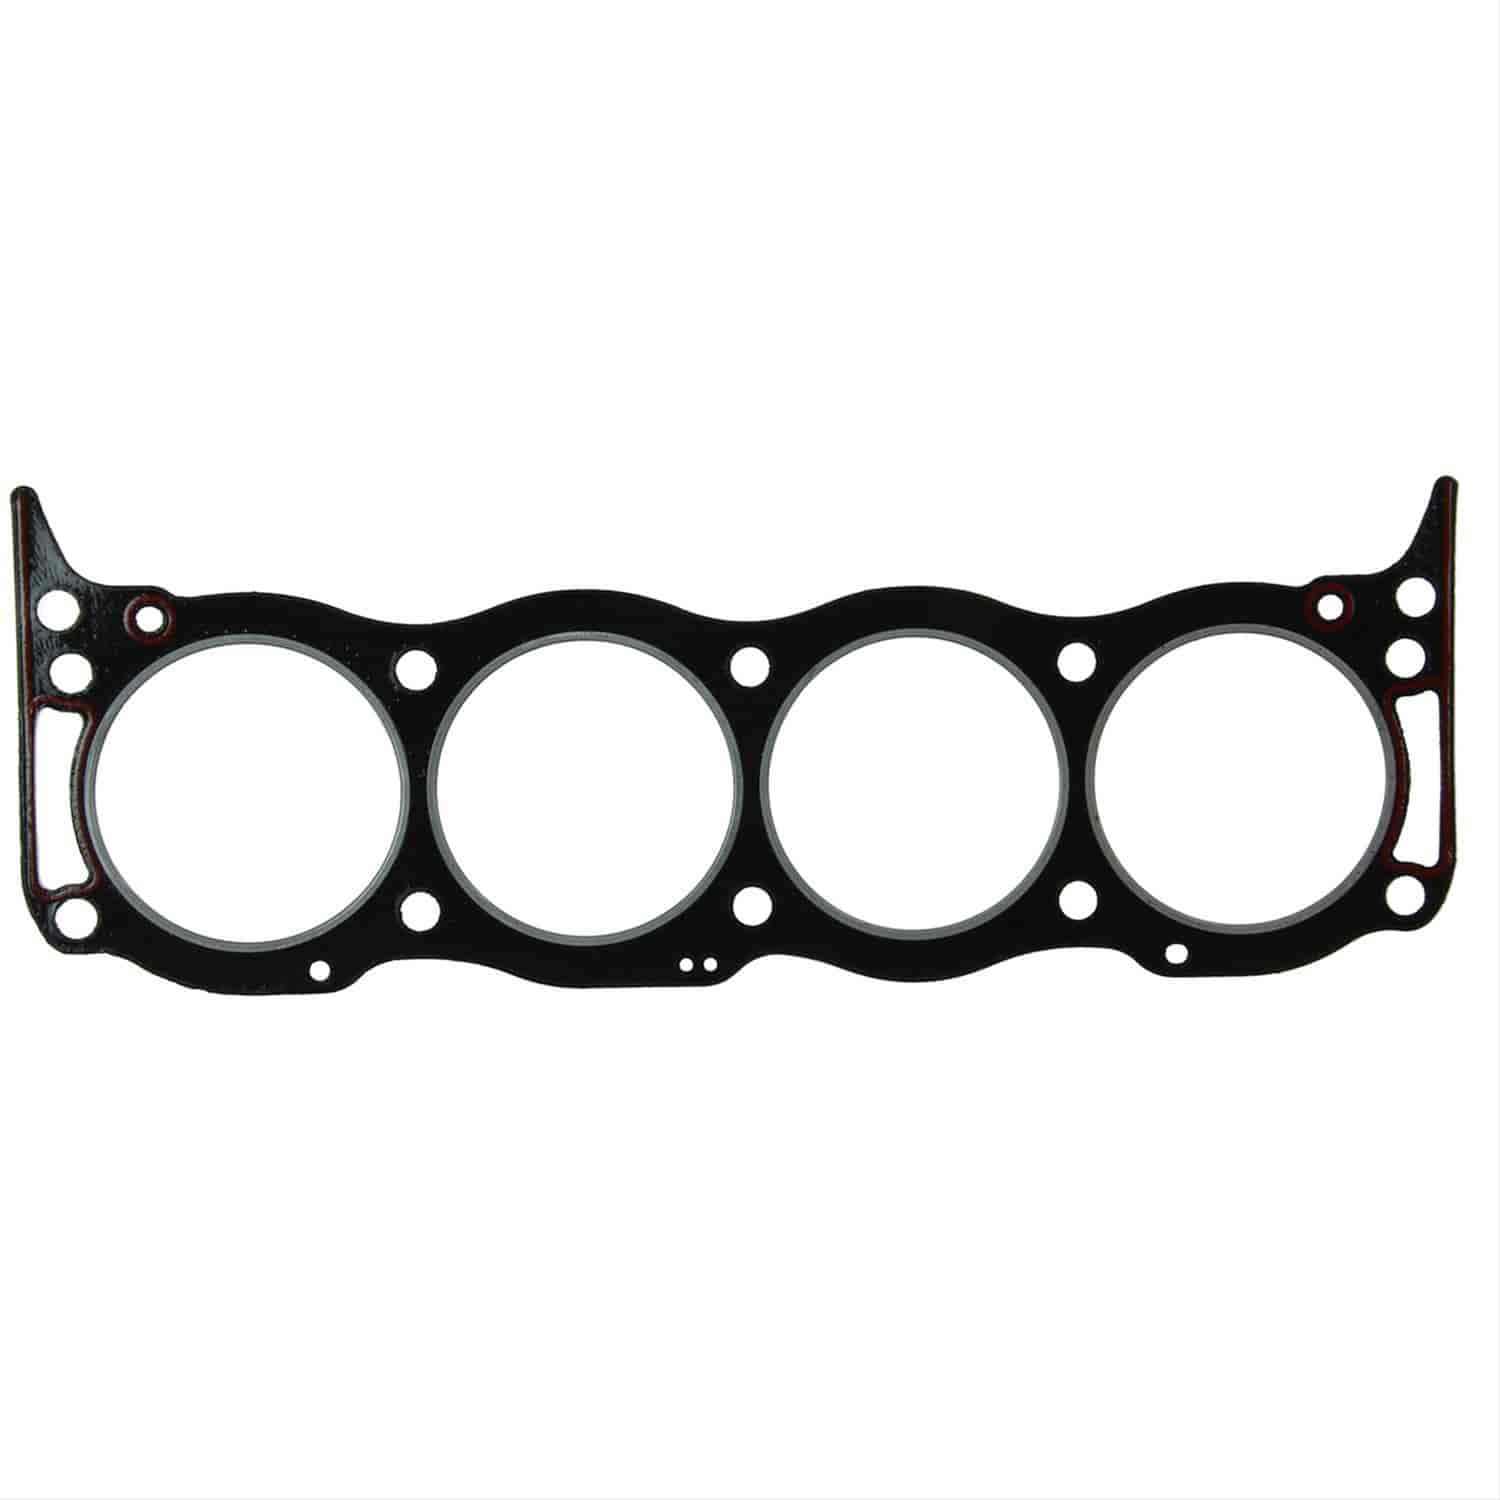 4.0 DISCOVERY HEAD GASKET